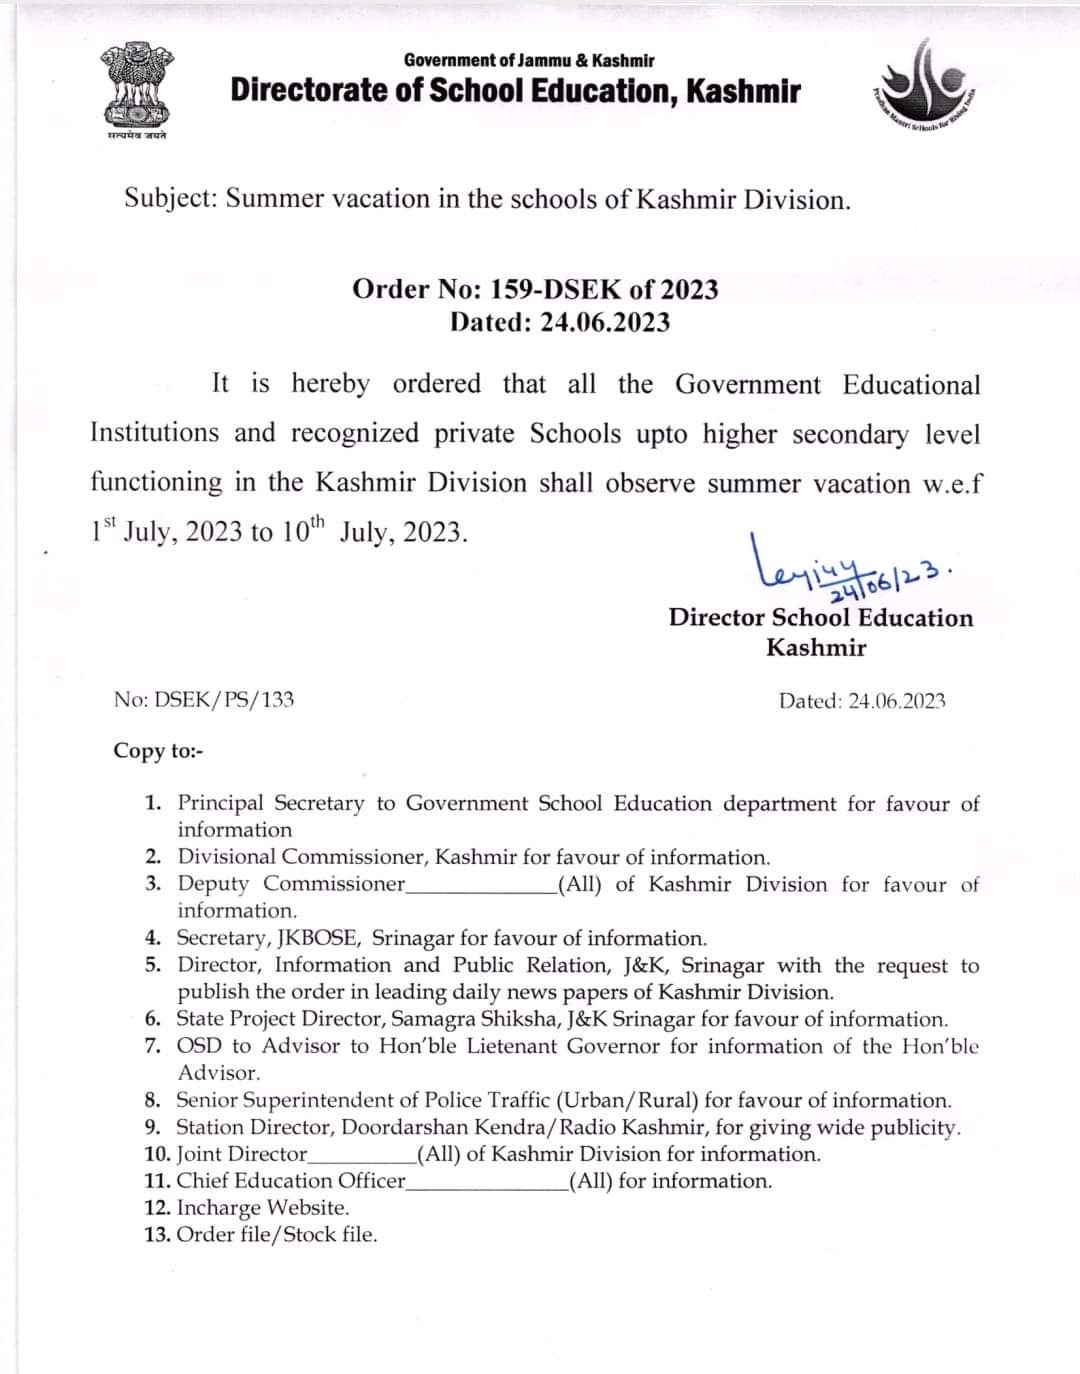 Summer Vacation in Kashmir Schools from July 1